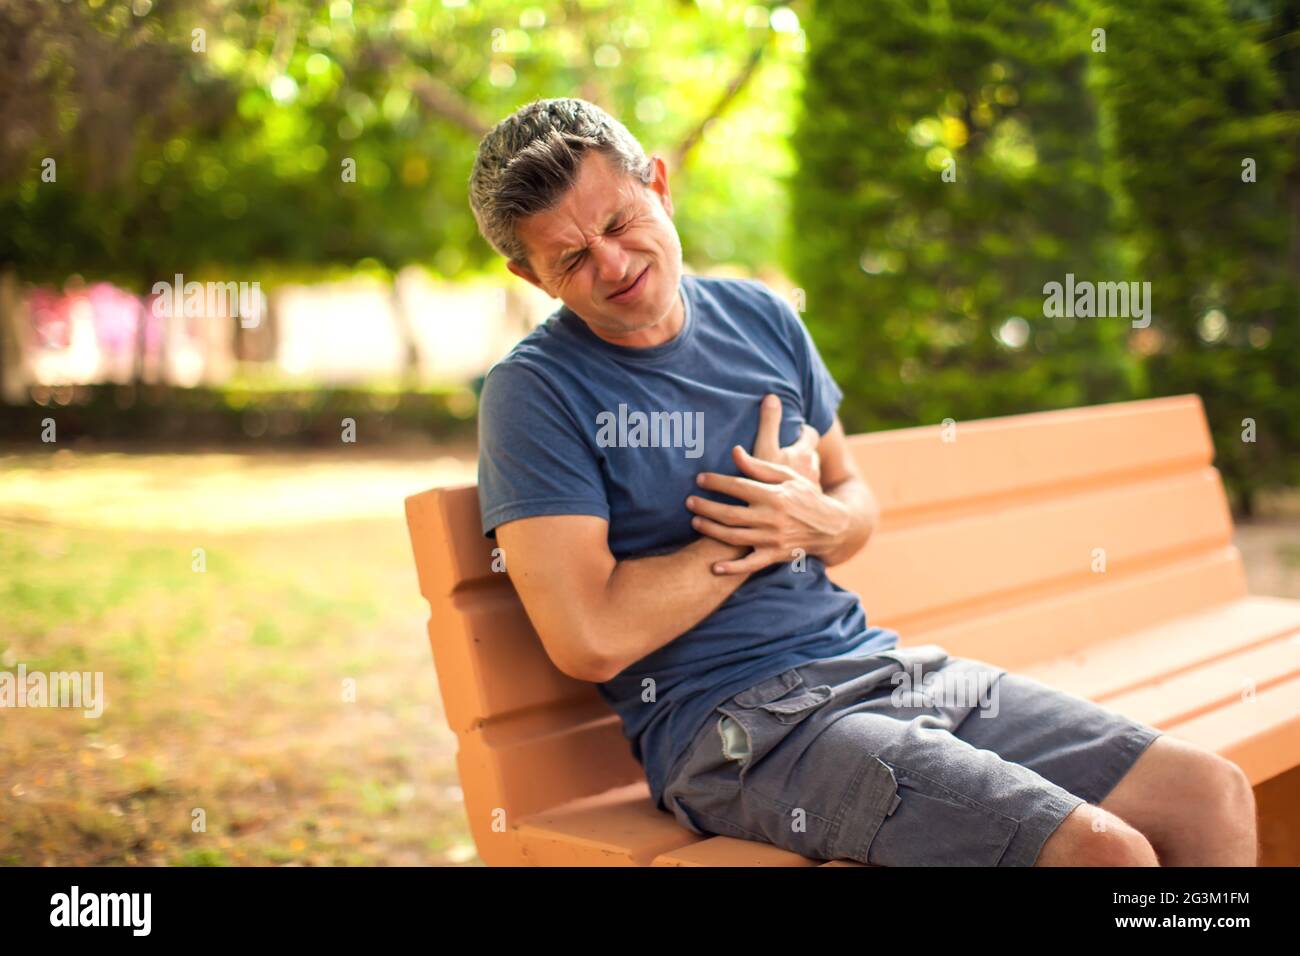 Man with heart pain outdoor. Male feeling chest pain sitting on the bench in the park. Healthcare and medicine concept Stock Photo